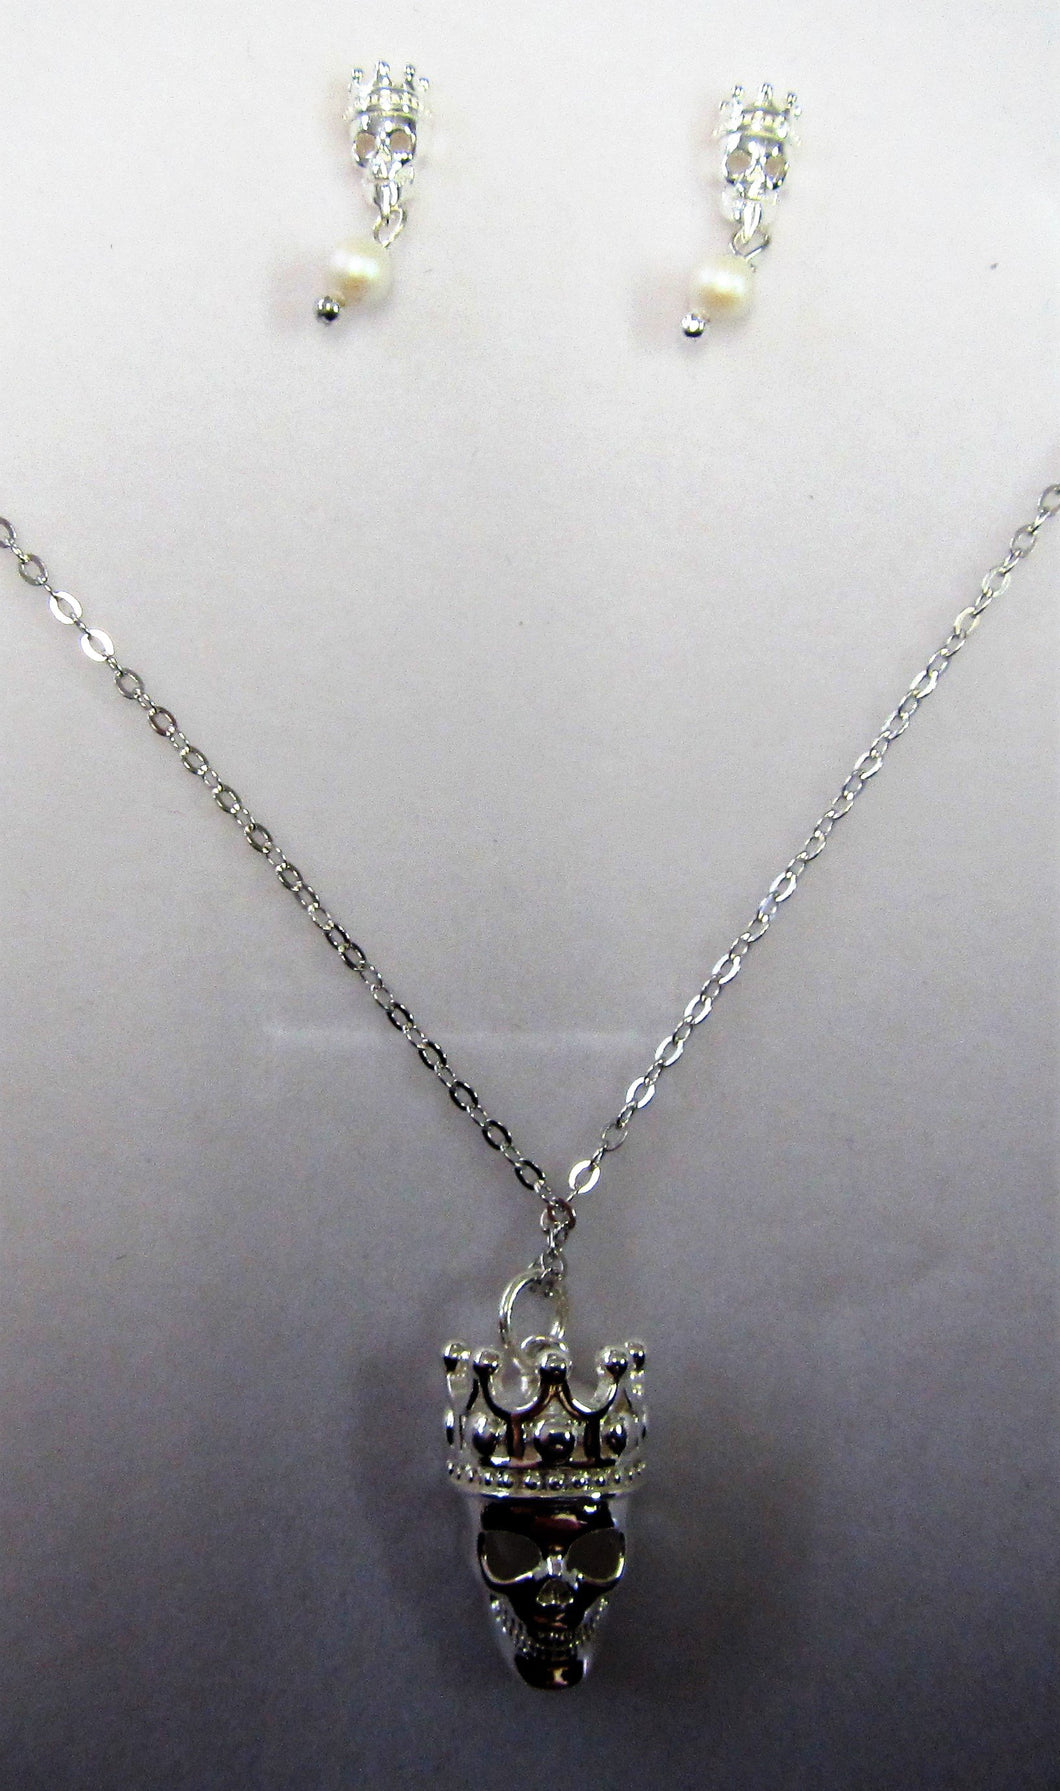 Handcrafted 925 sterling silver skull necklace and earring set